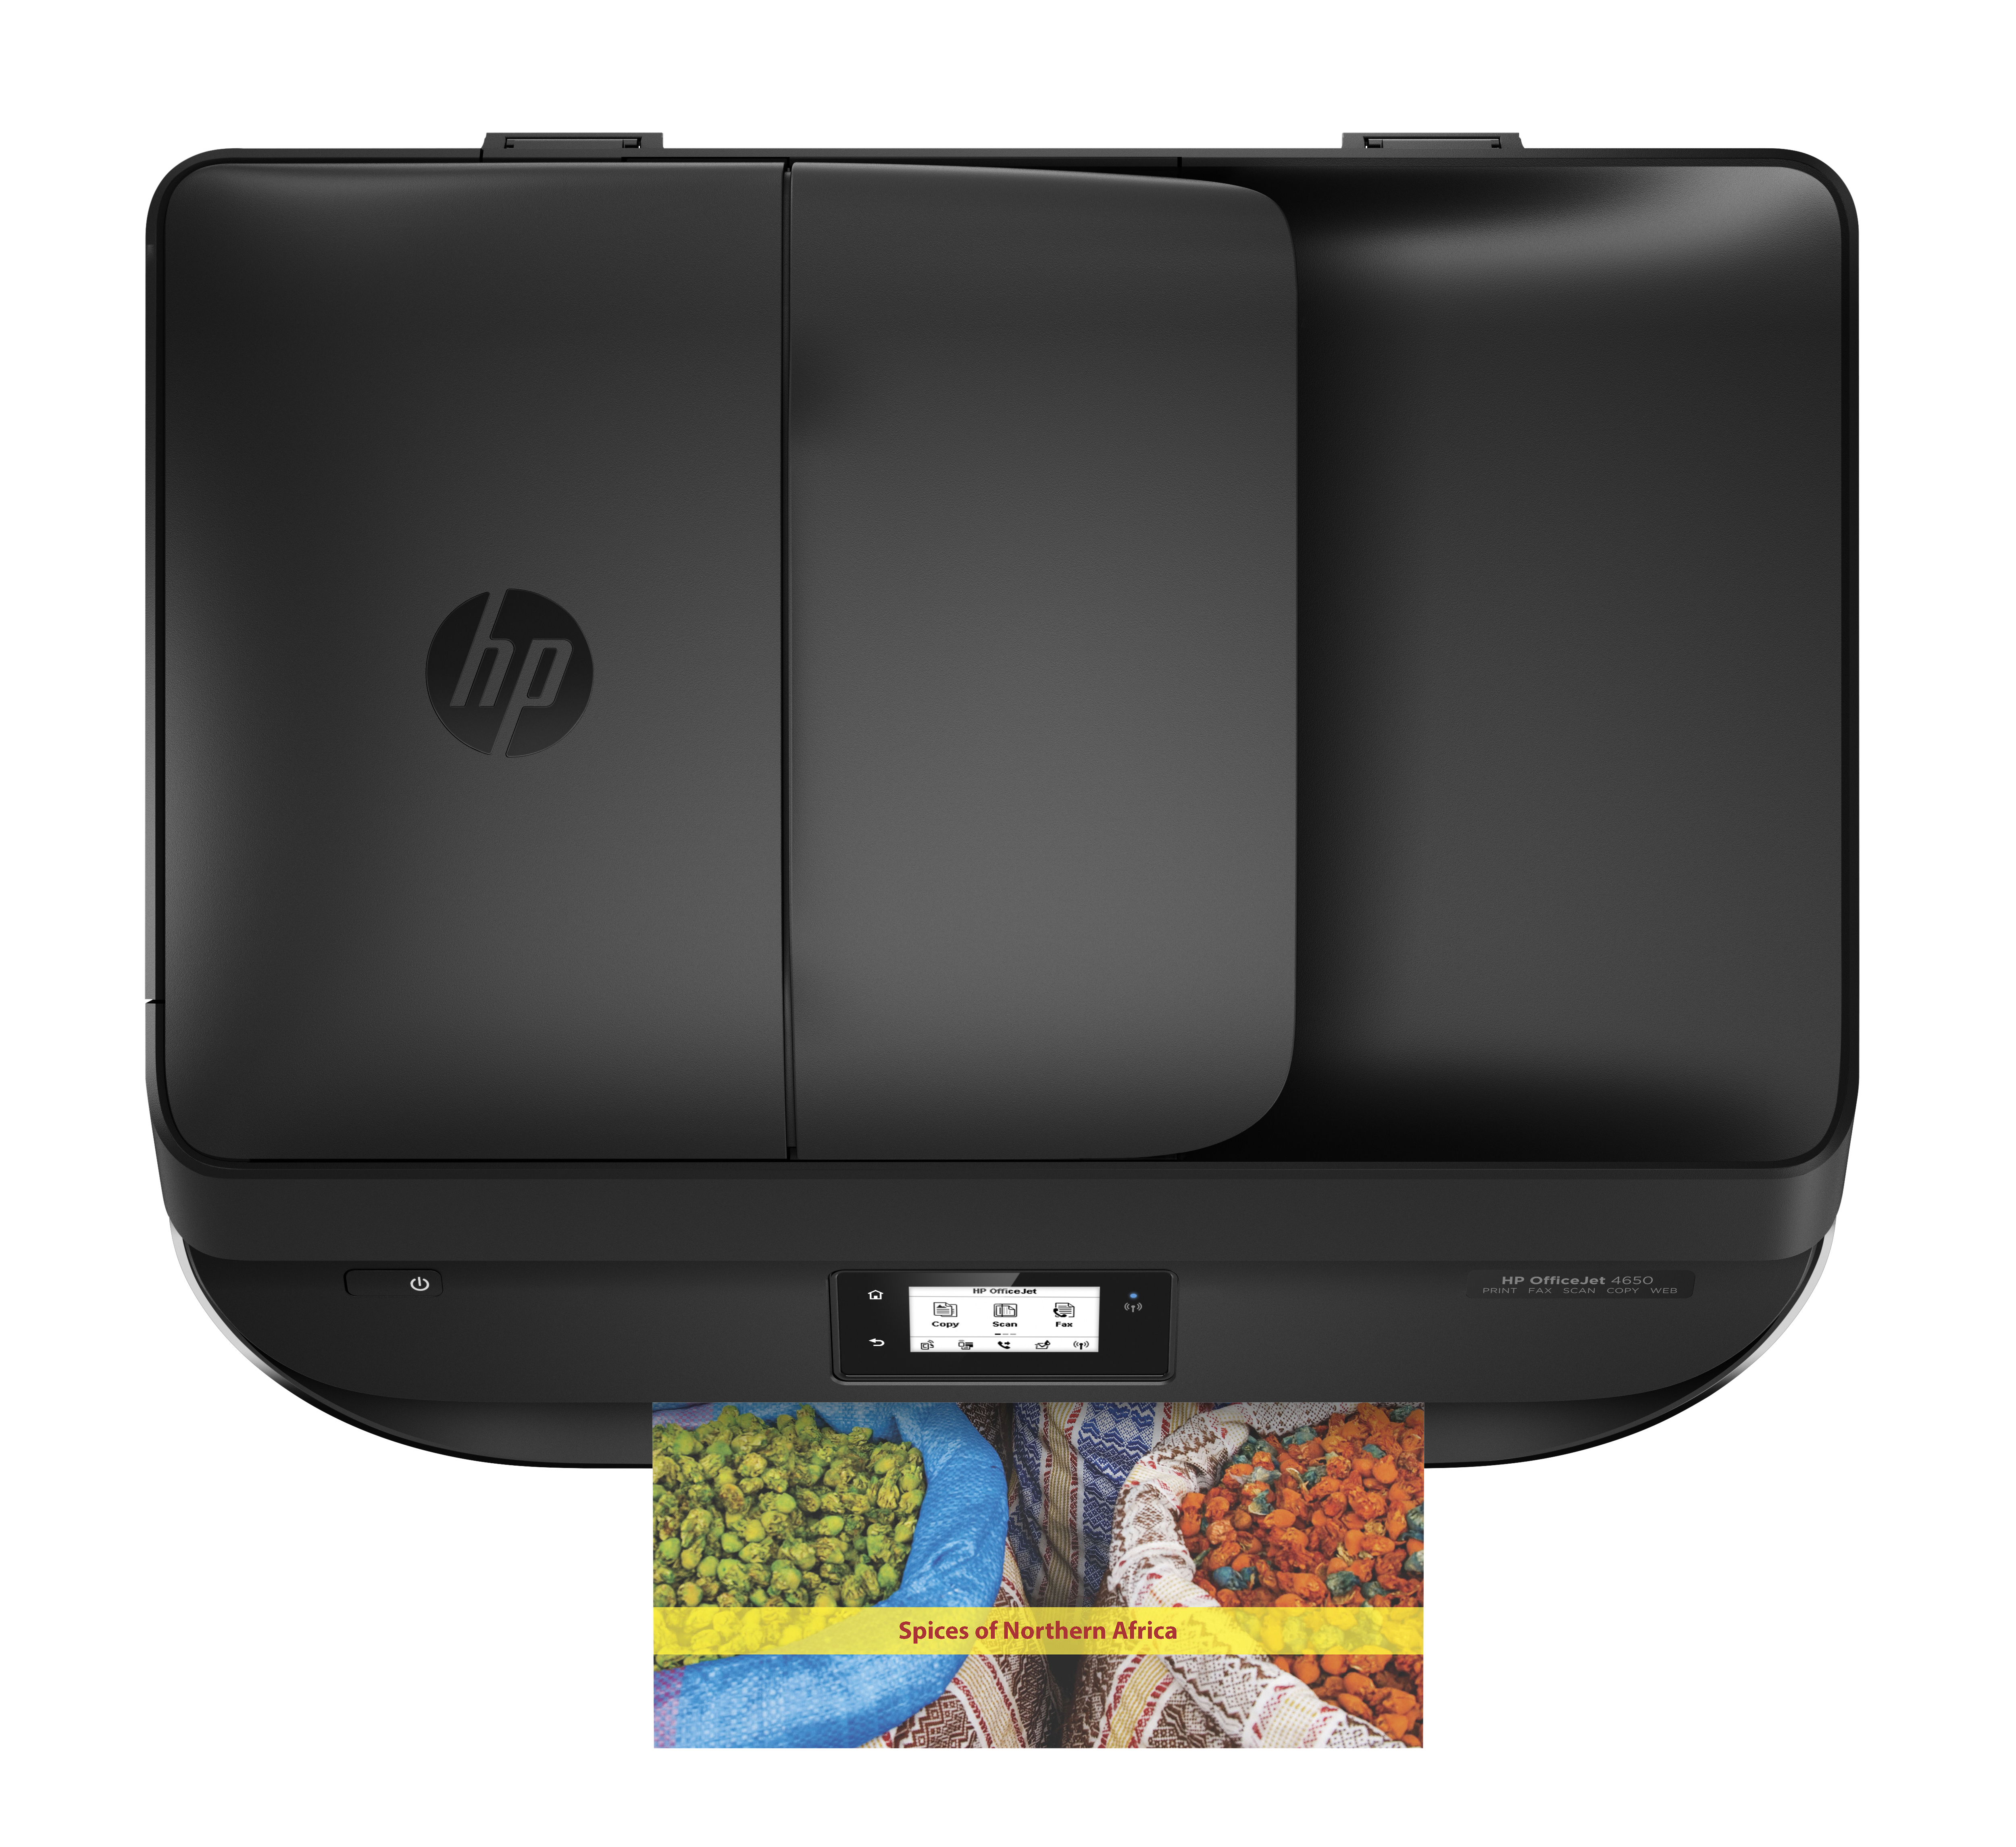 hp officejet 4650 unable to find gutenprint apollo 2100